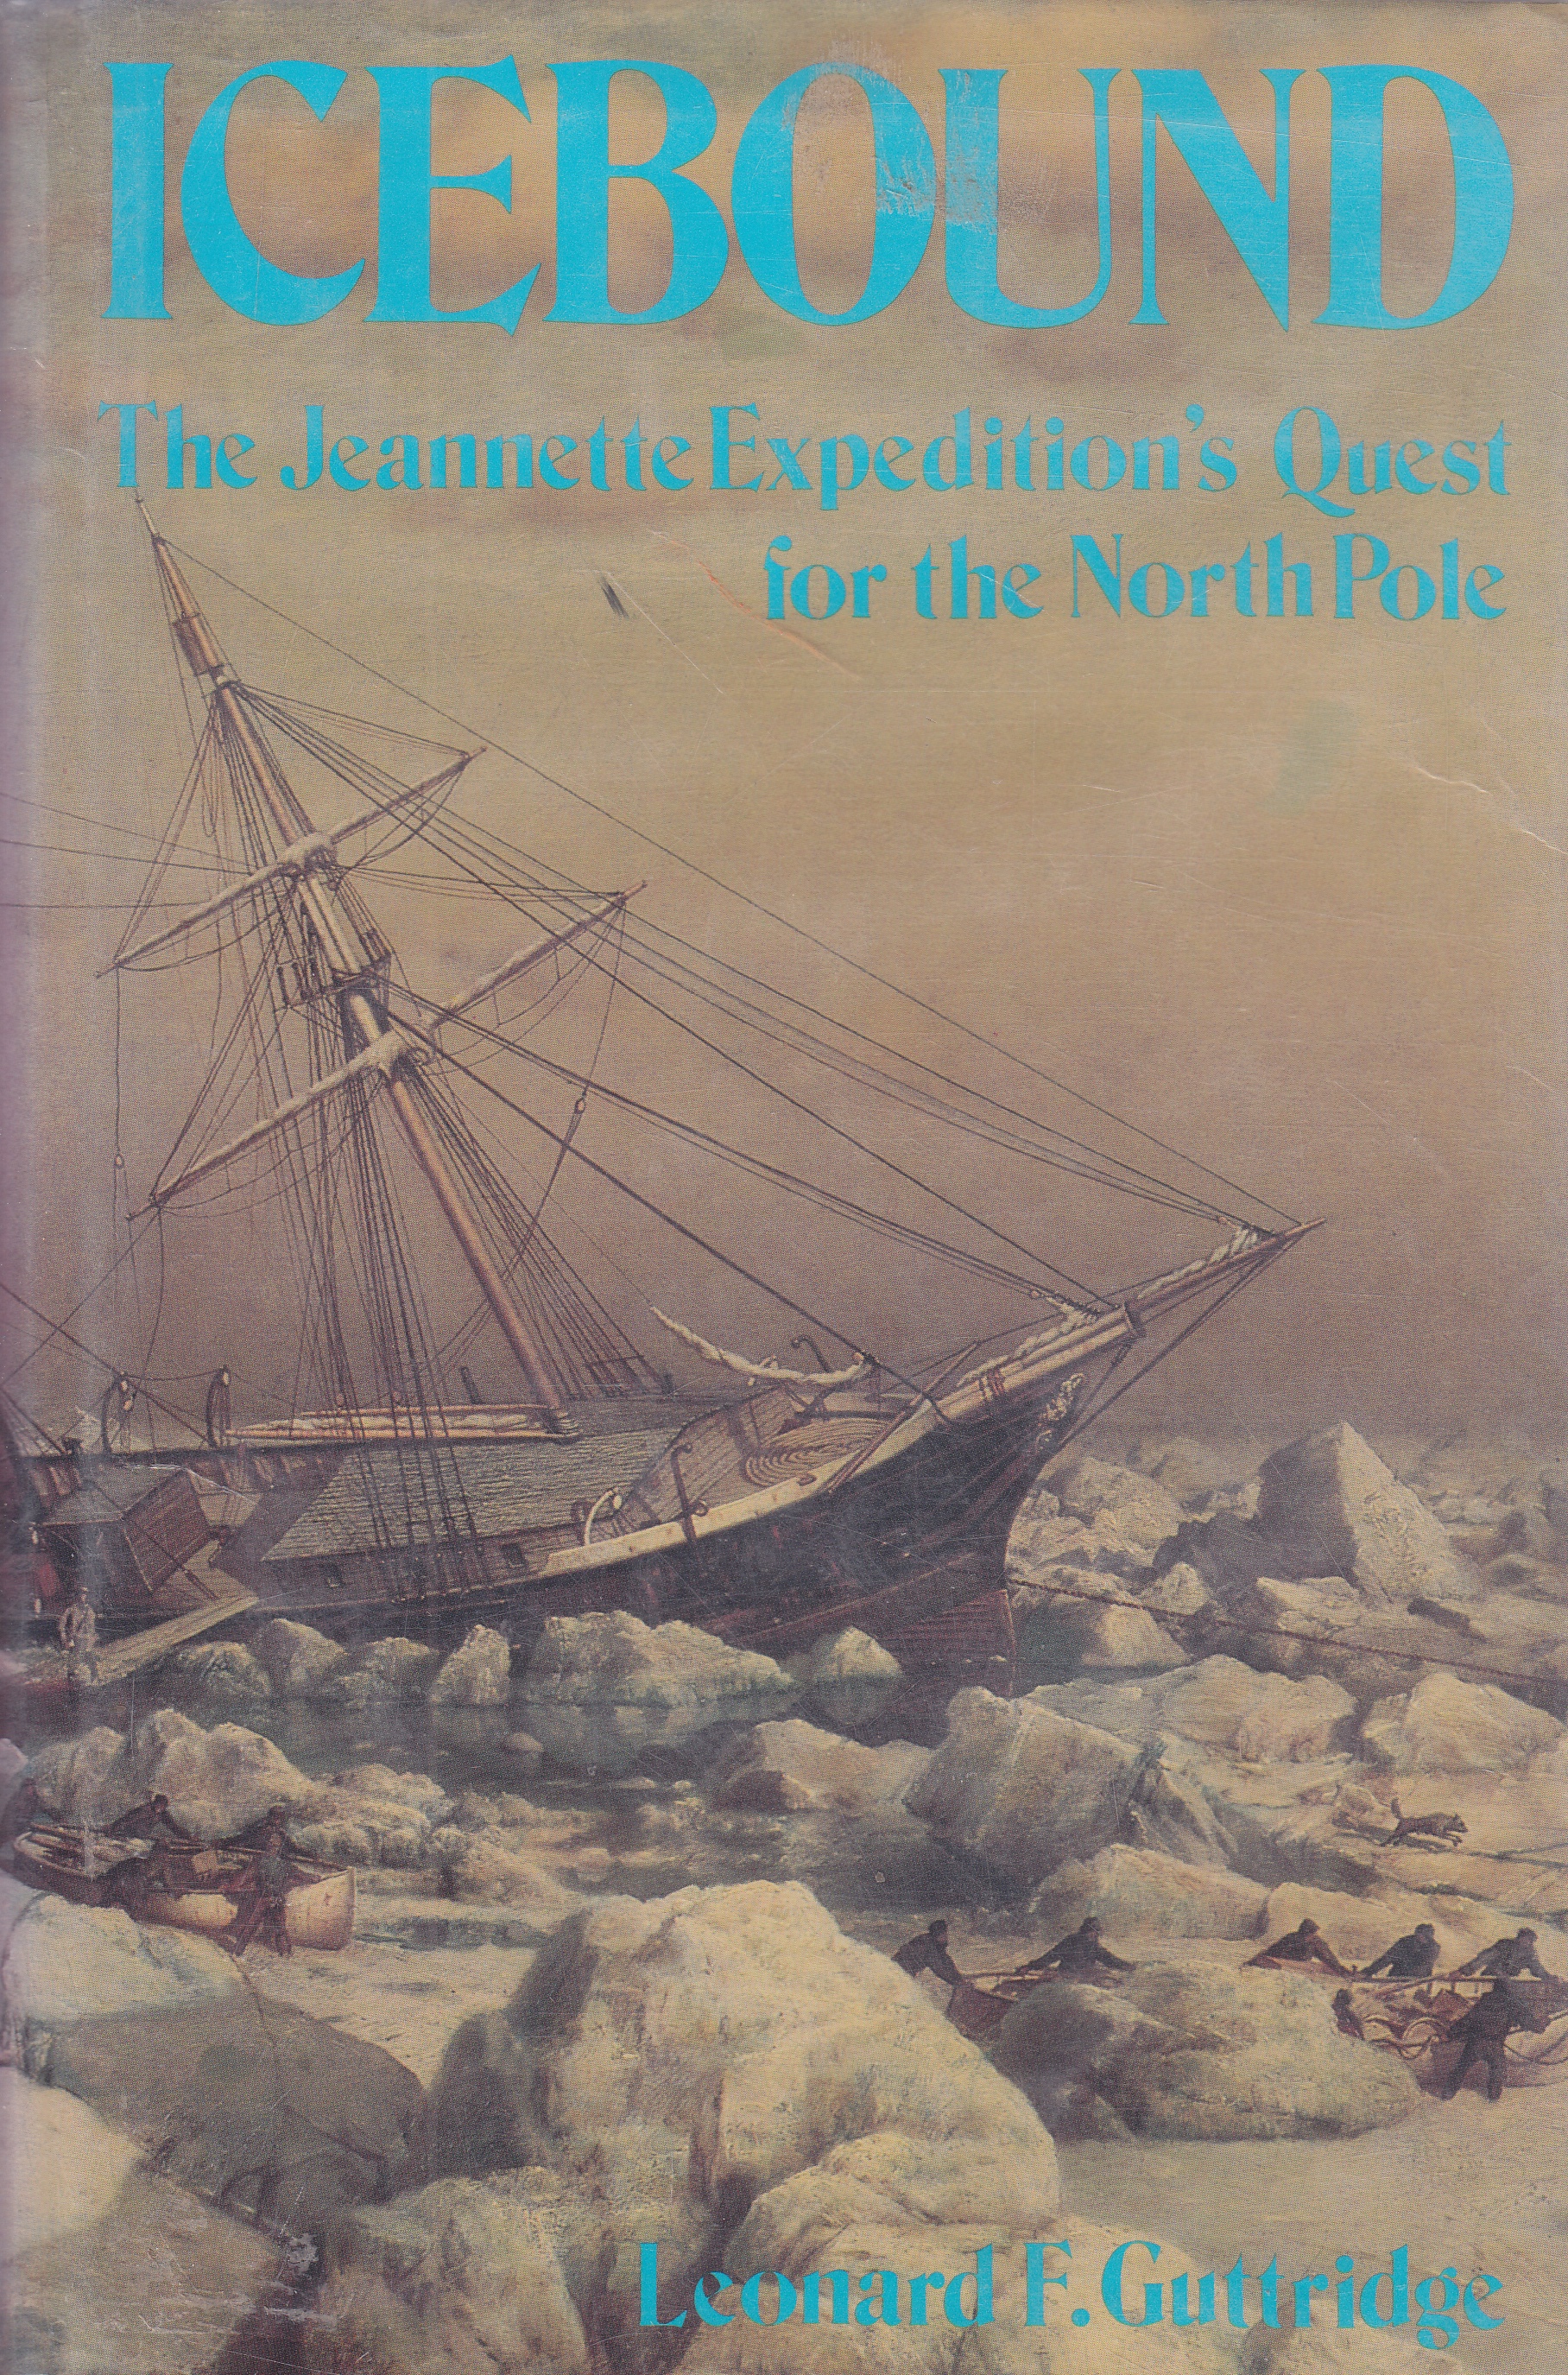 Image for Icebound The Jeannette Expedition's Quest for the North Pole